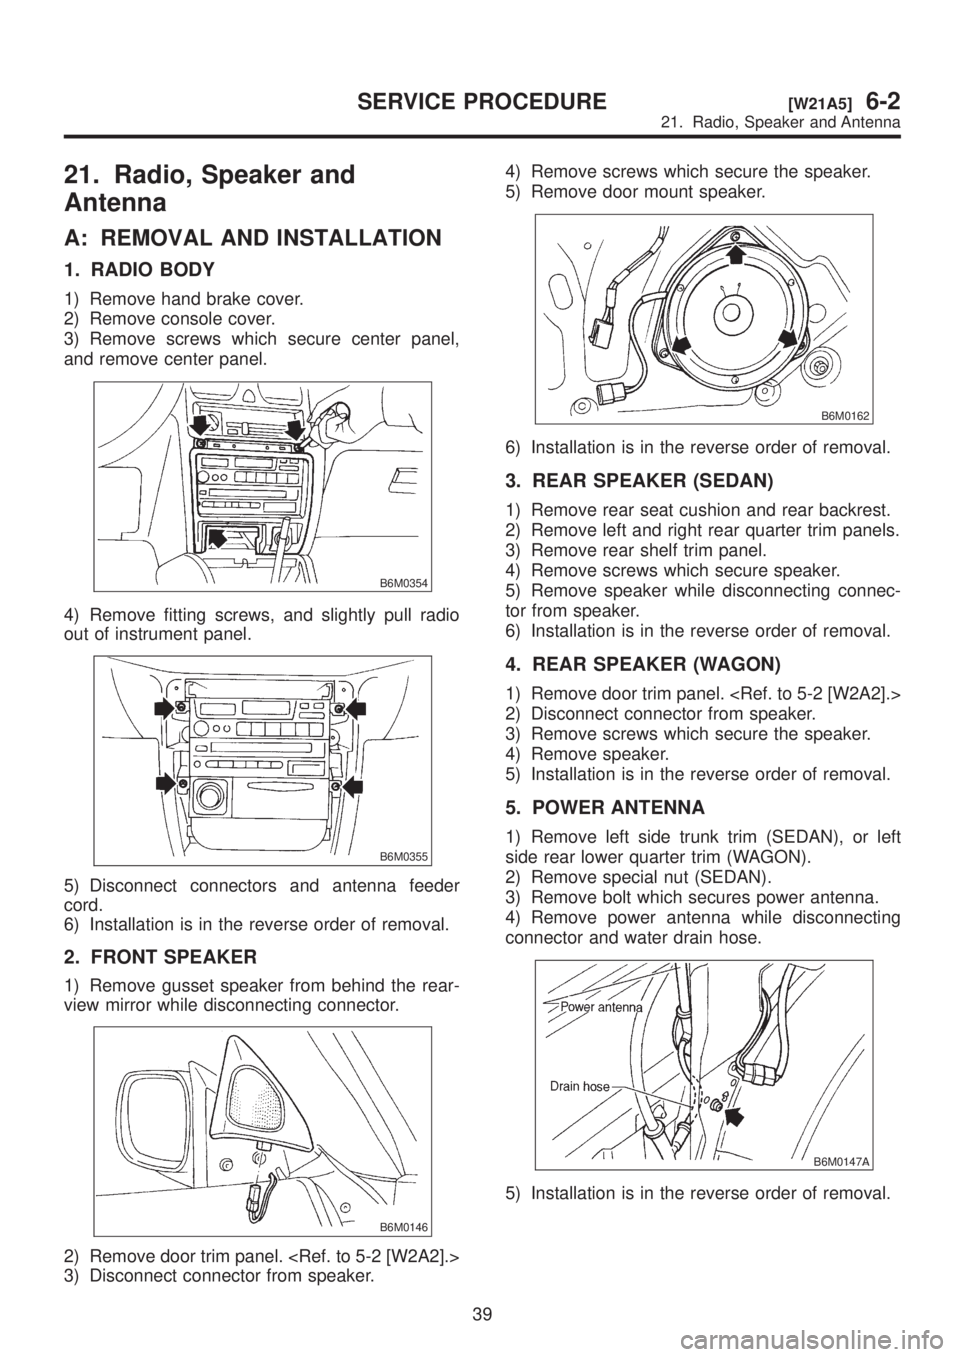 SUBARU LEGACY 1999  Service Repair Manual 21. Radio, Speaker and
Antenna
A: REMOVAL AND INSTALLATION
1. RADIO BODY
1) Remove hand brake cover.
2) Remove console cover.
3) Remove screws which secure center panel,
and remove center panel.
B6M03